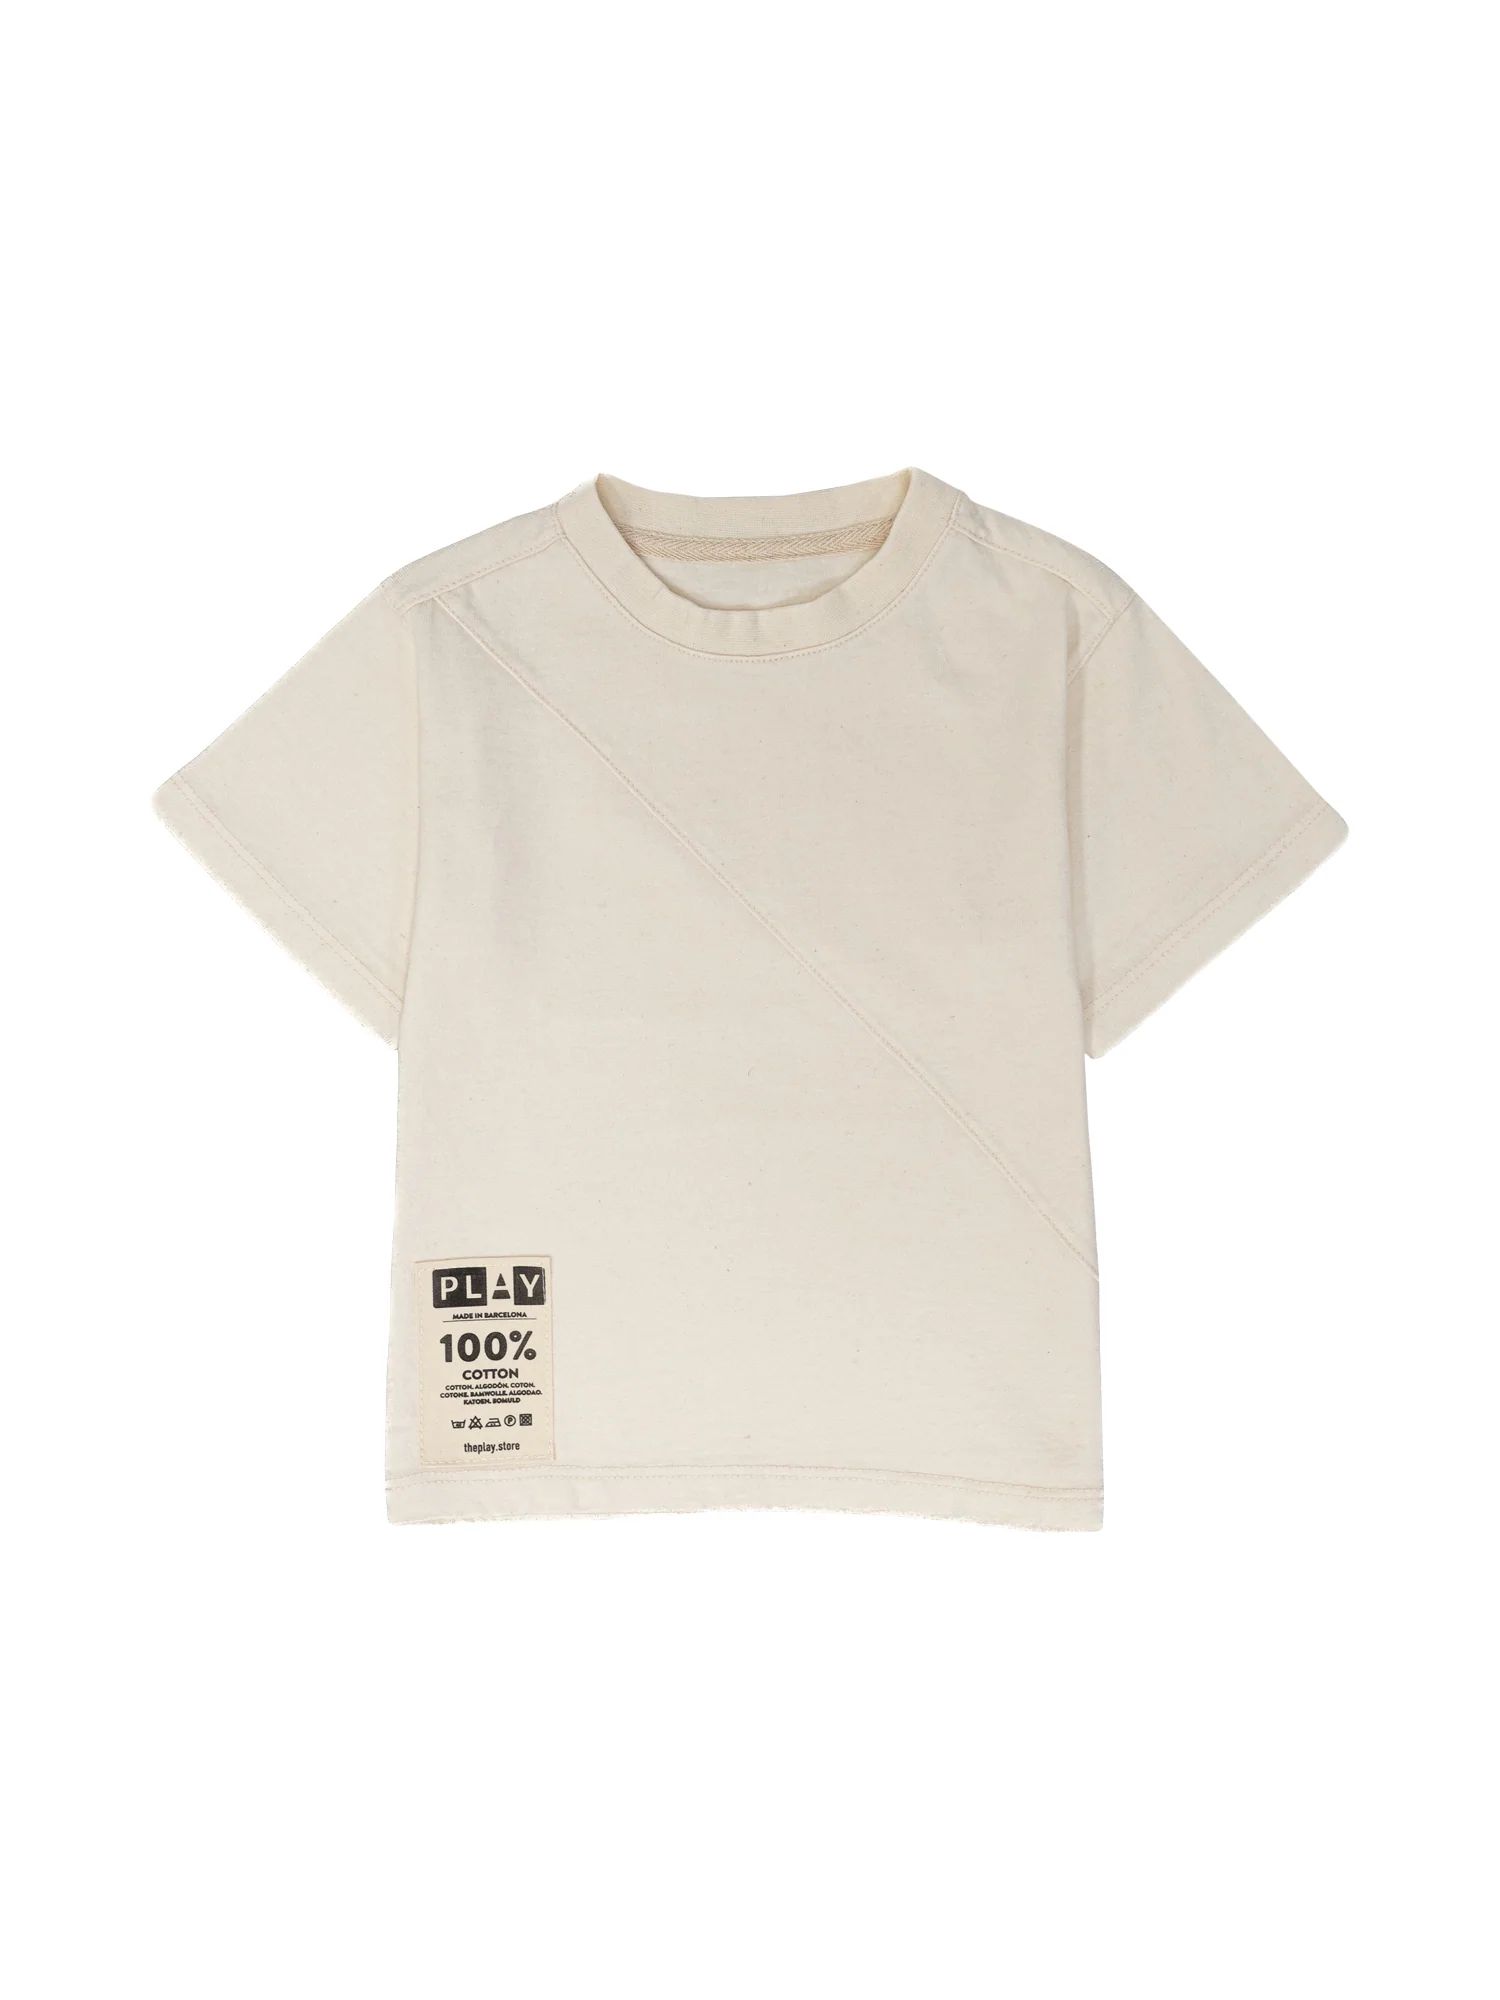 All Weather Play SS Tee | Danrie